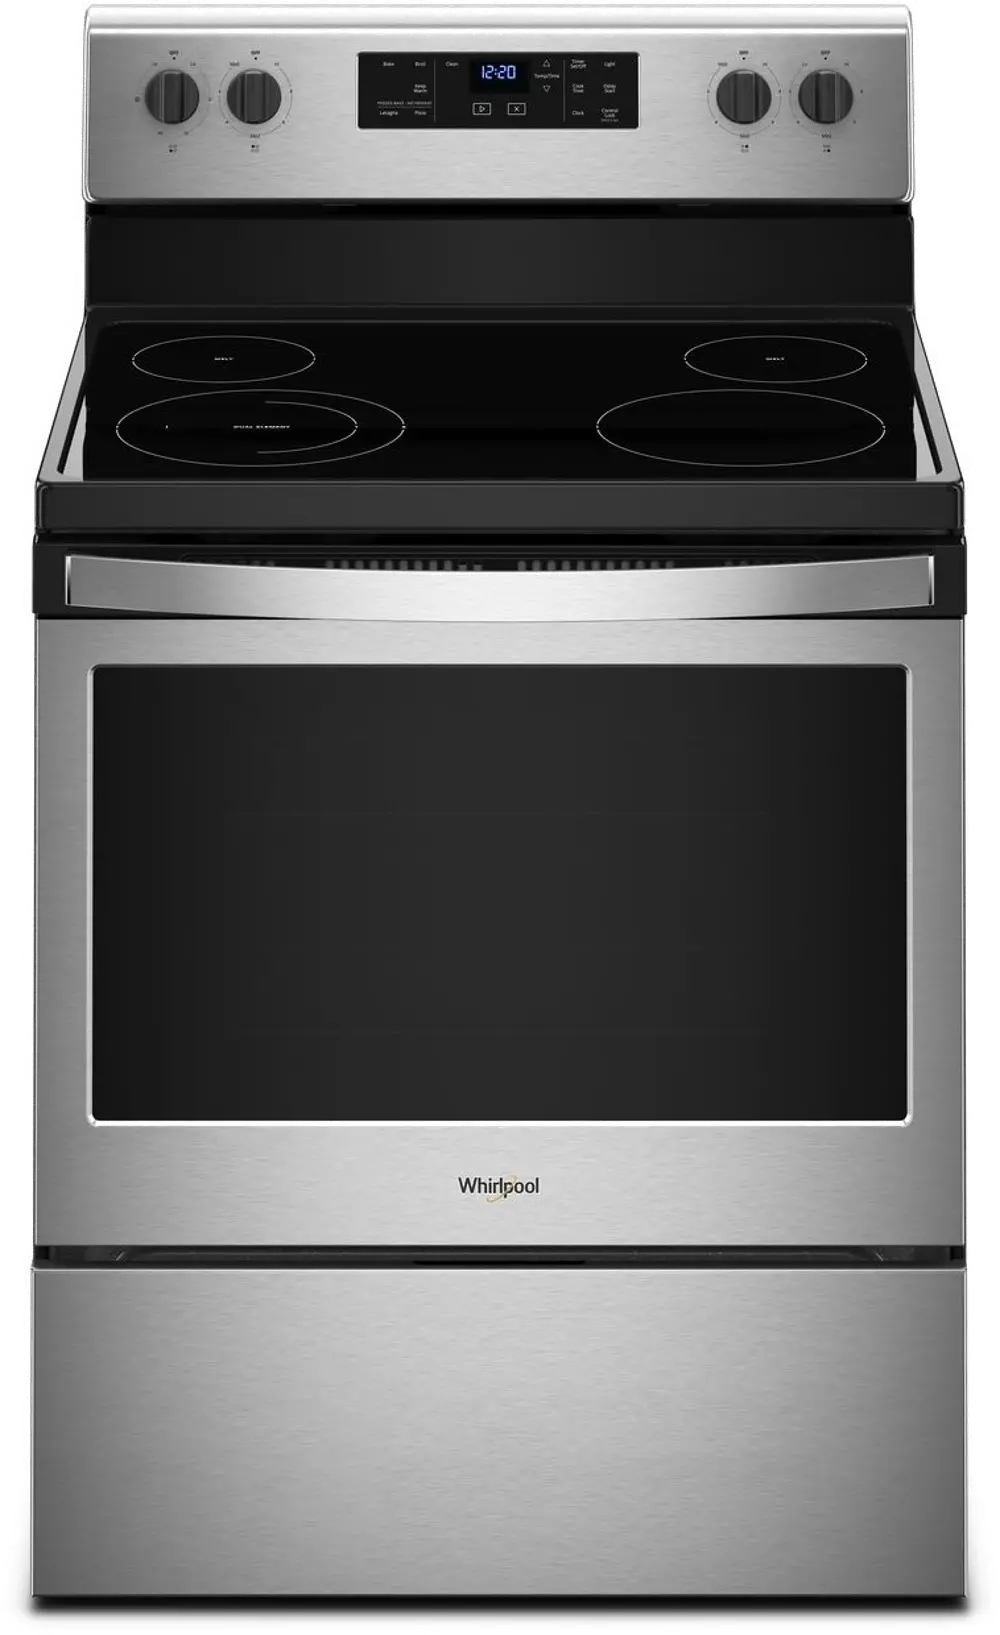 WFE510S0HS Whirlpool 5.3 cu. ft. Electric Range - 30 Inch Stainless Steel-1